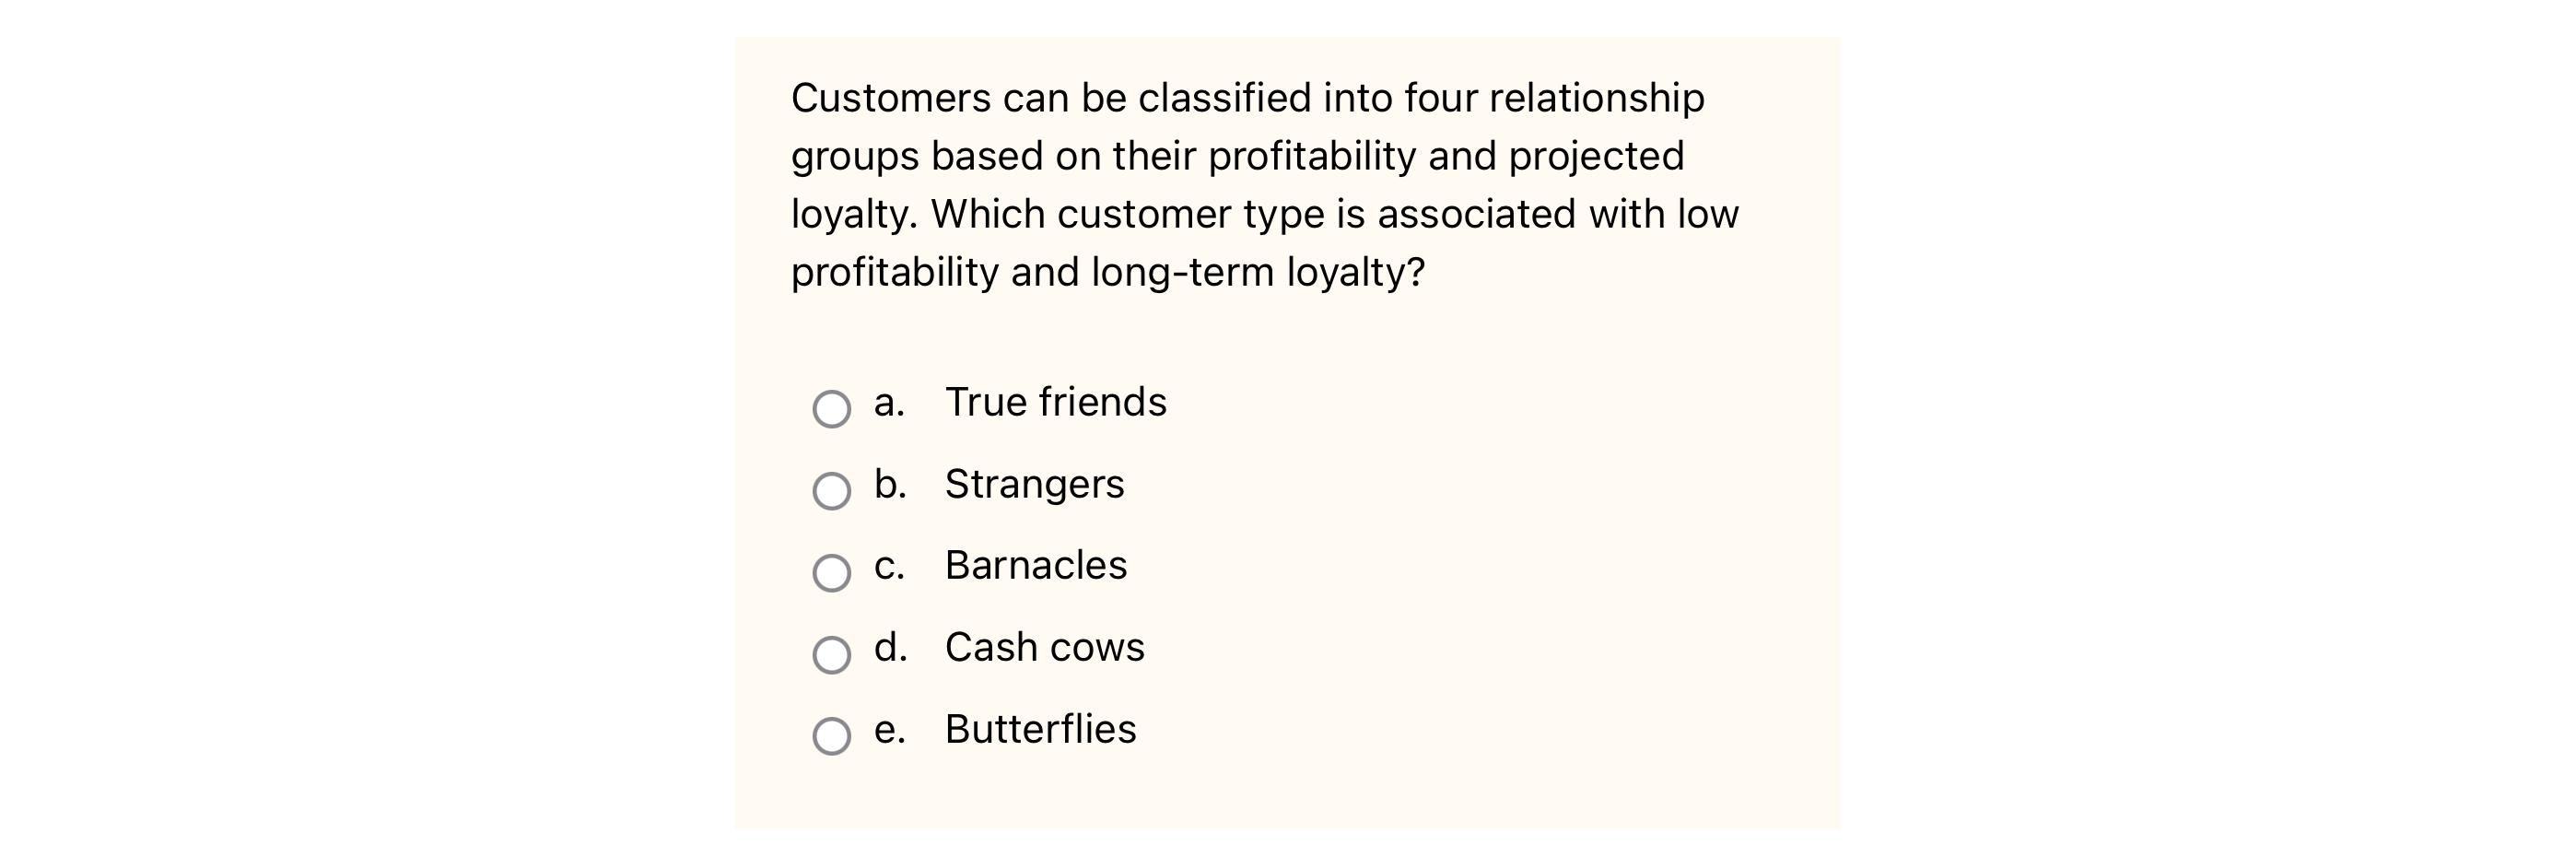 Customers can be classified into four relationship groups based on their profitability and projected loyalty.